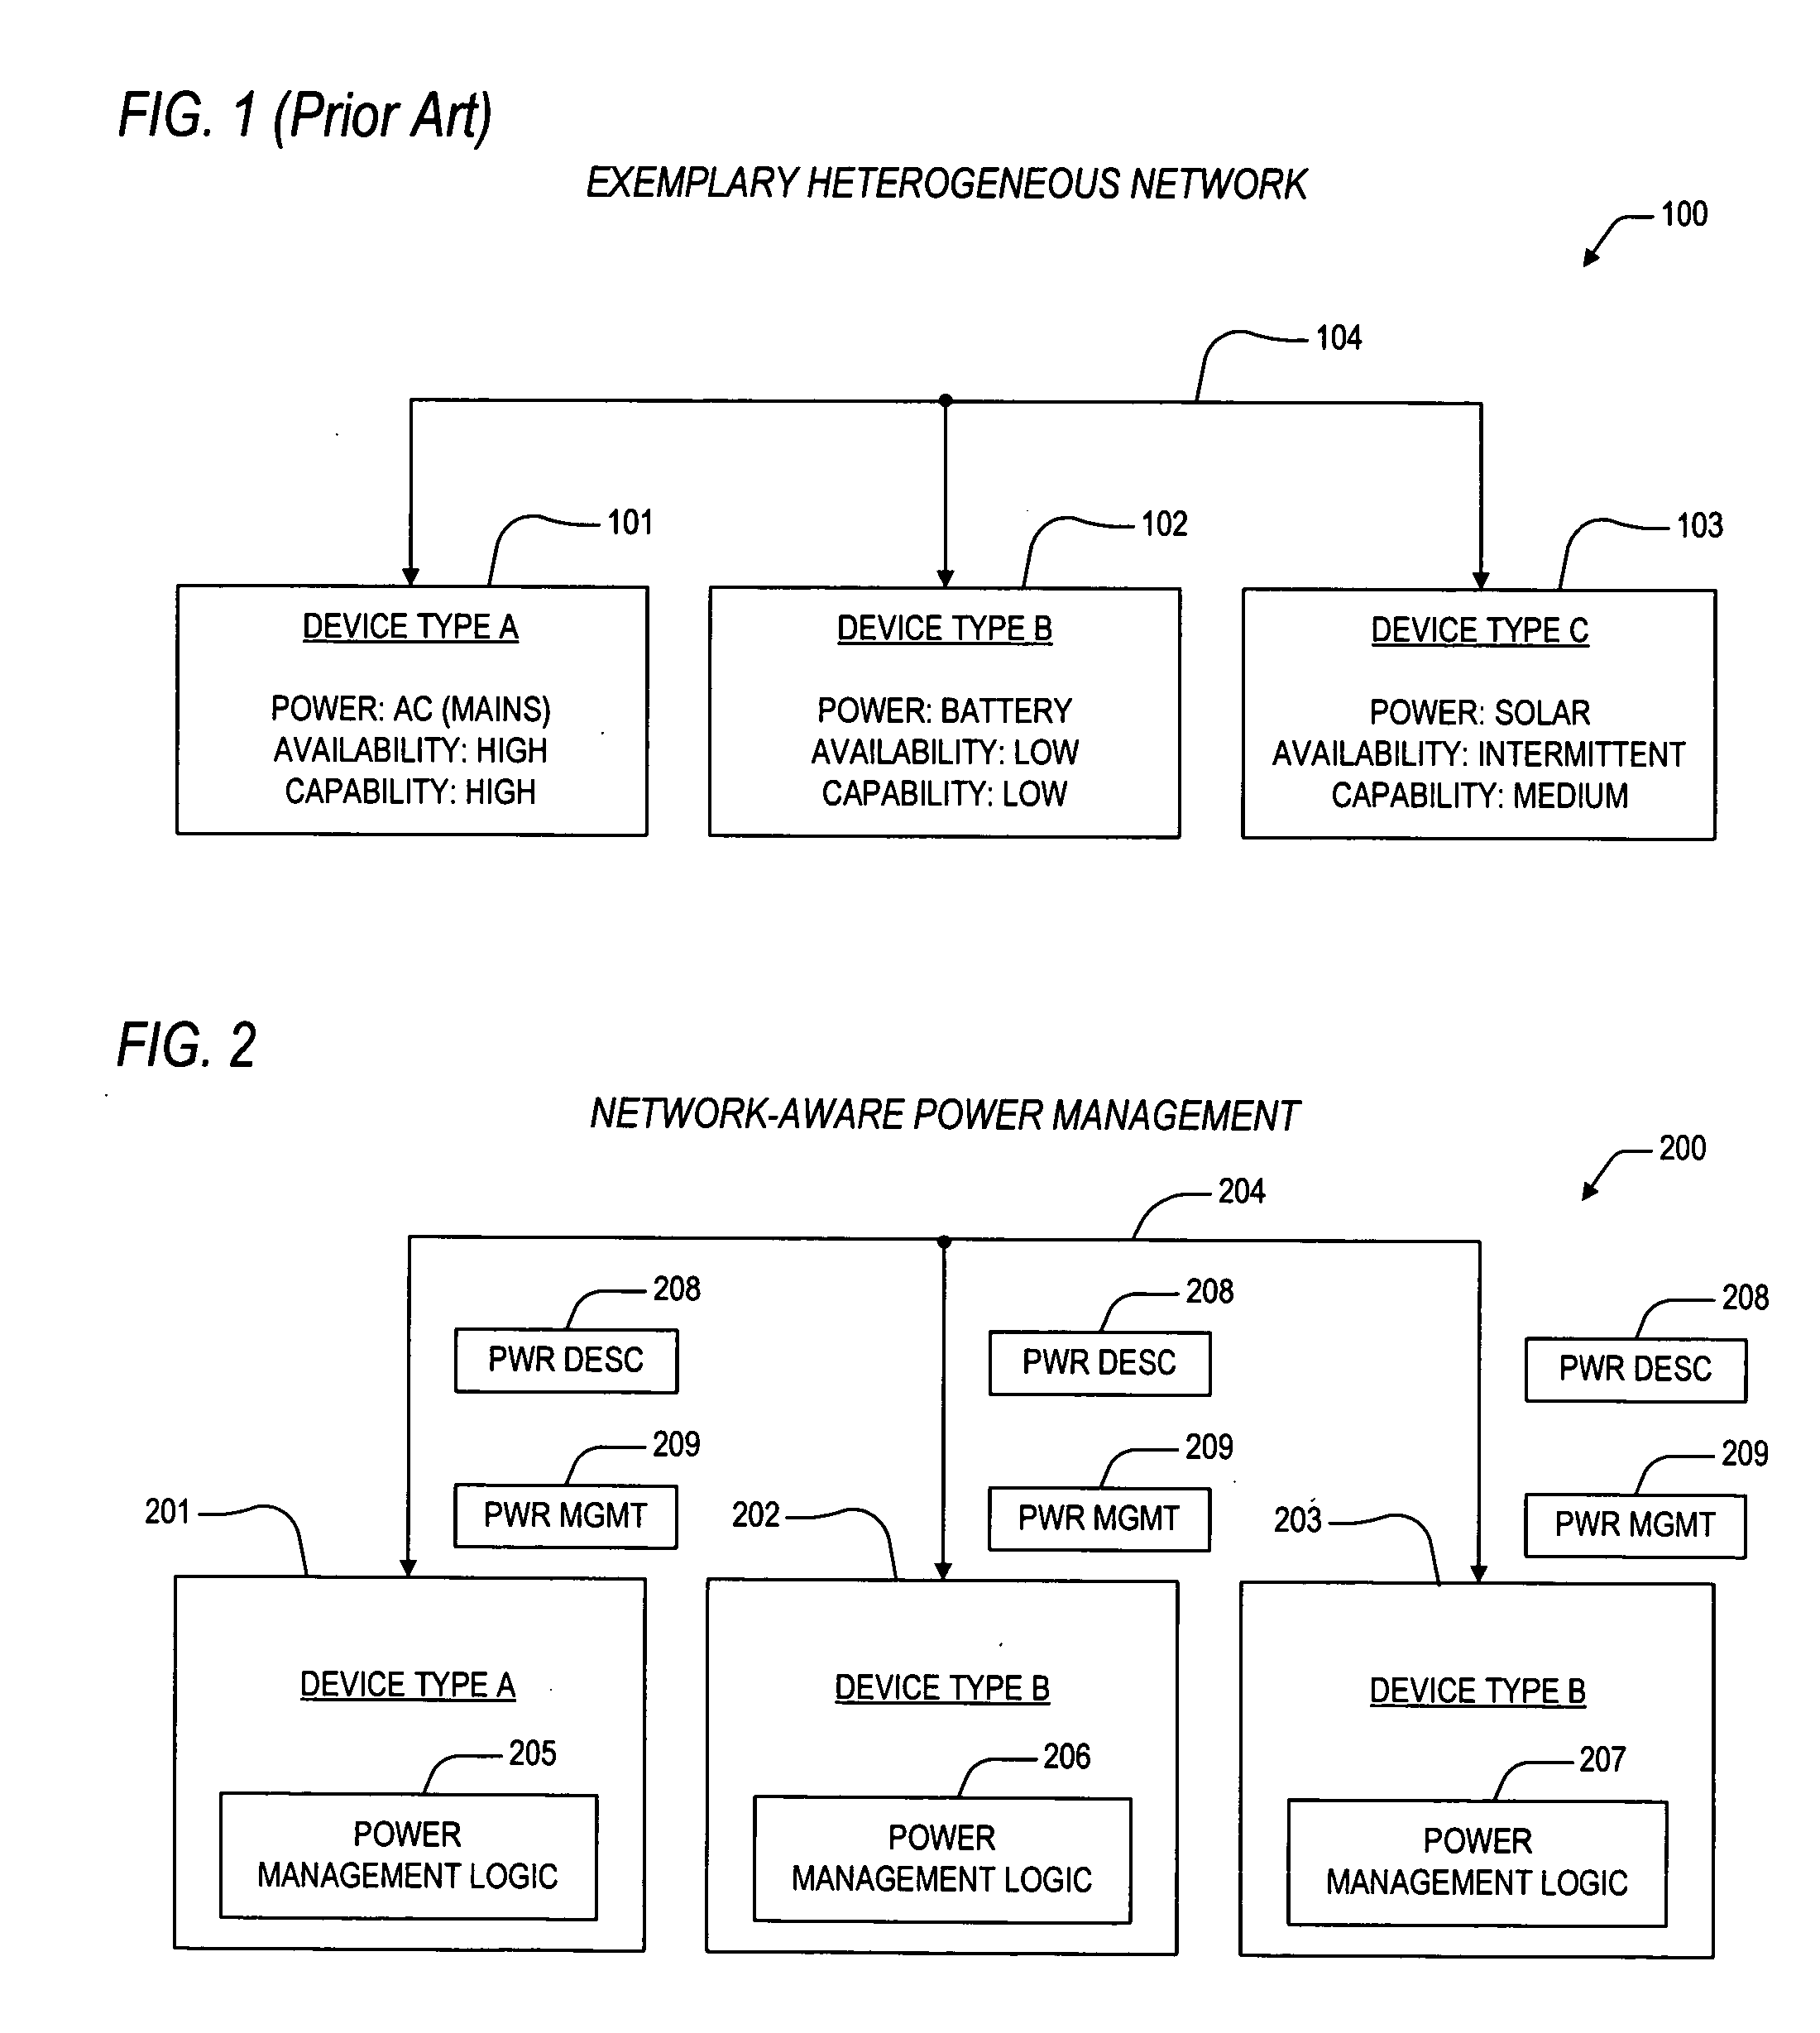 Apparatus and method for network-aware power management